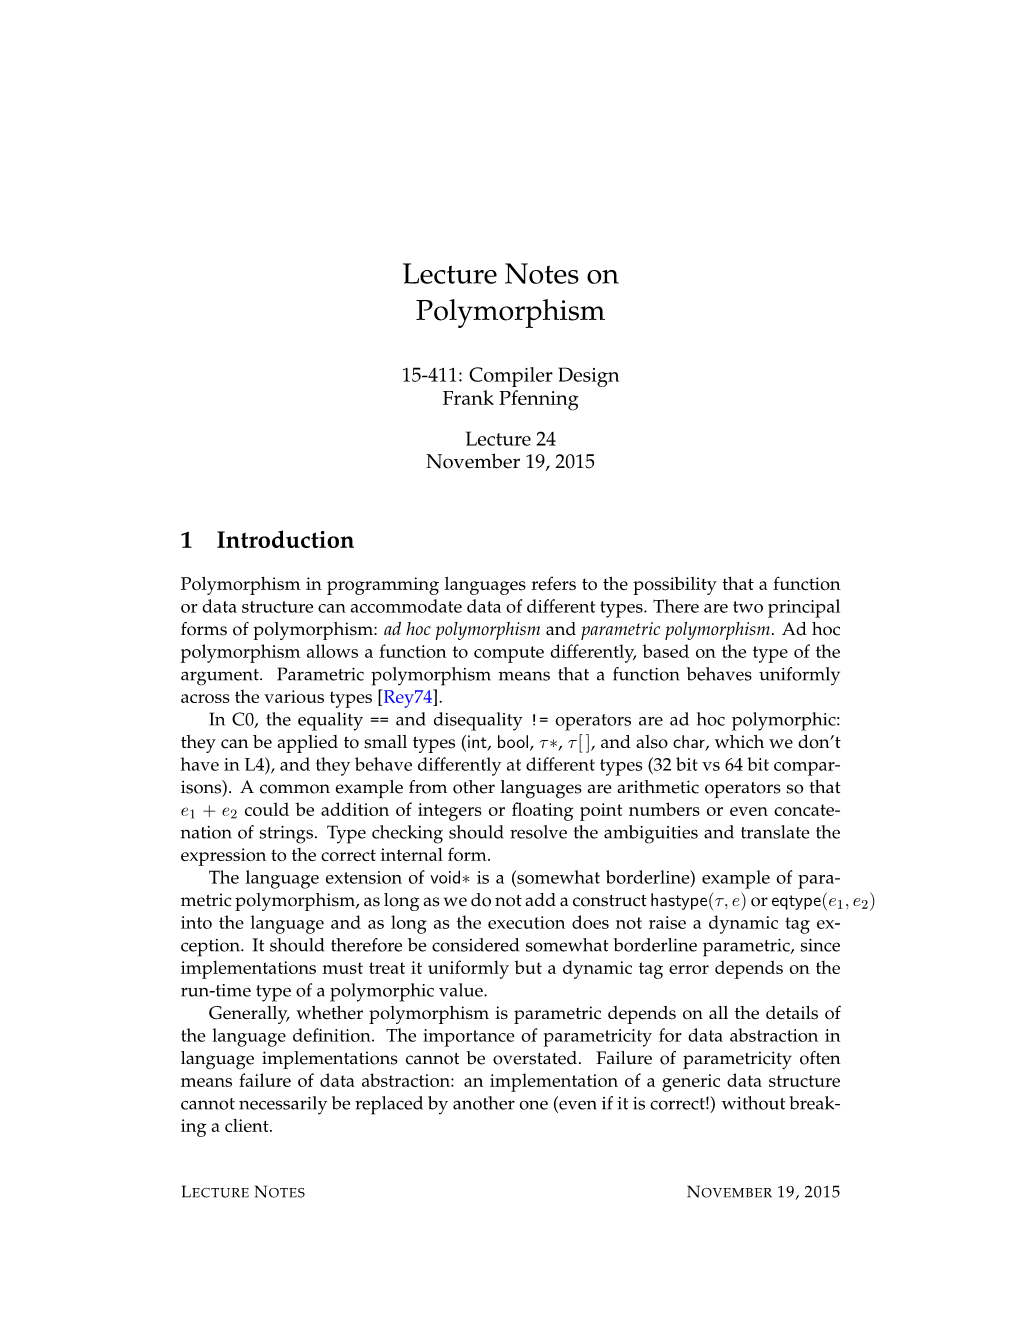 Lecture Notes on Polymorphism